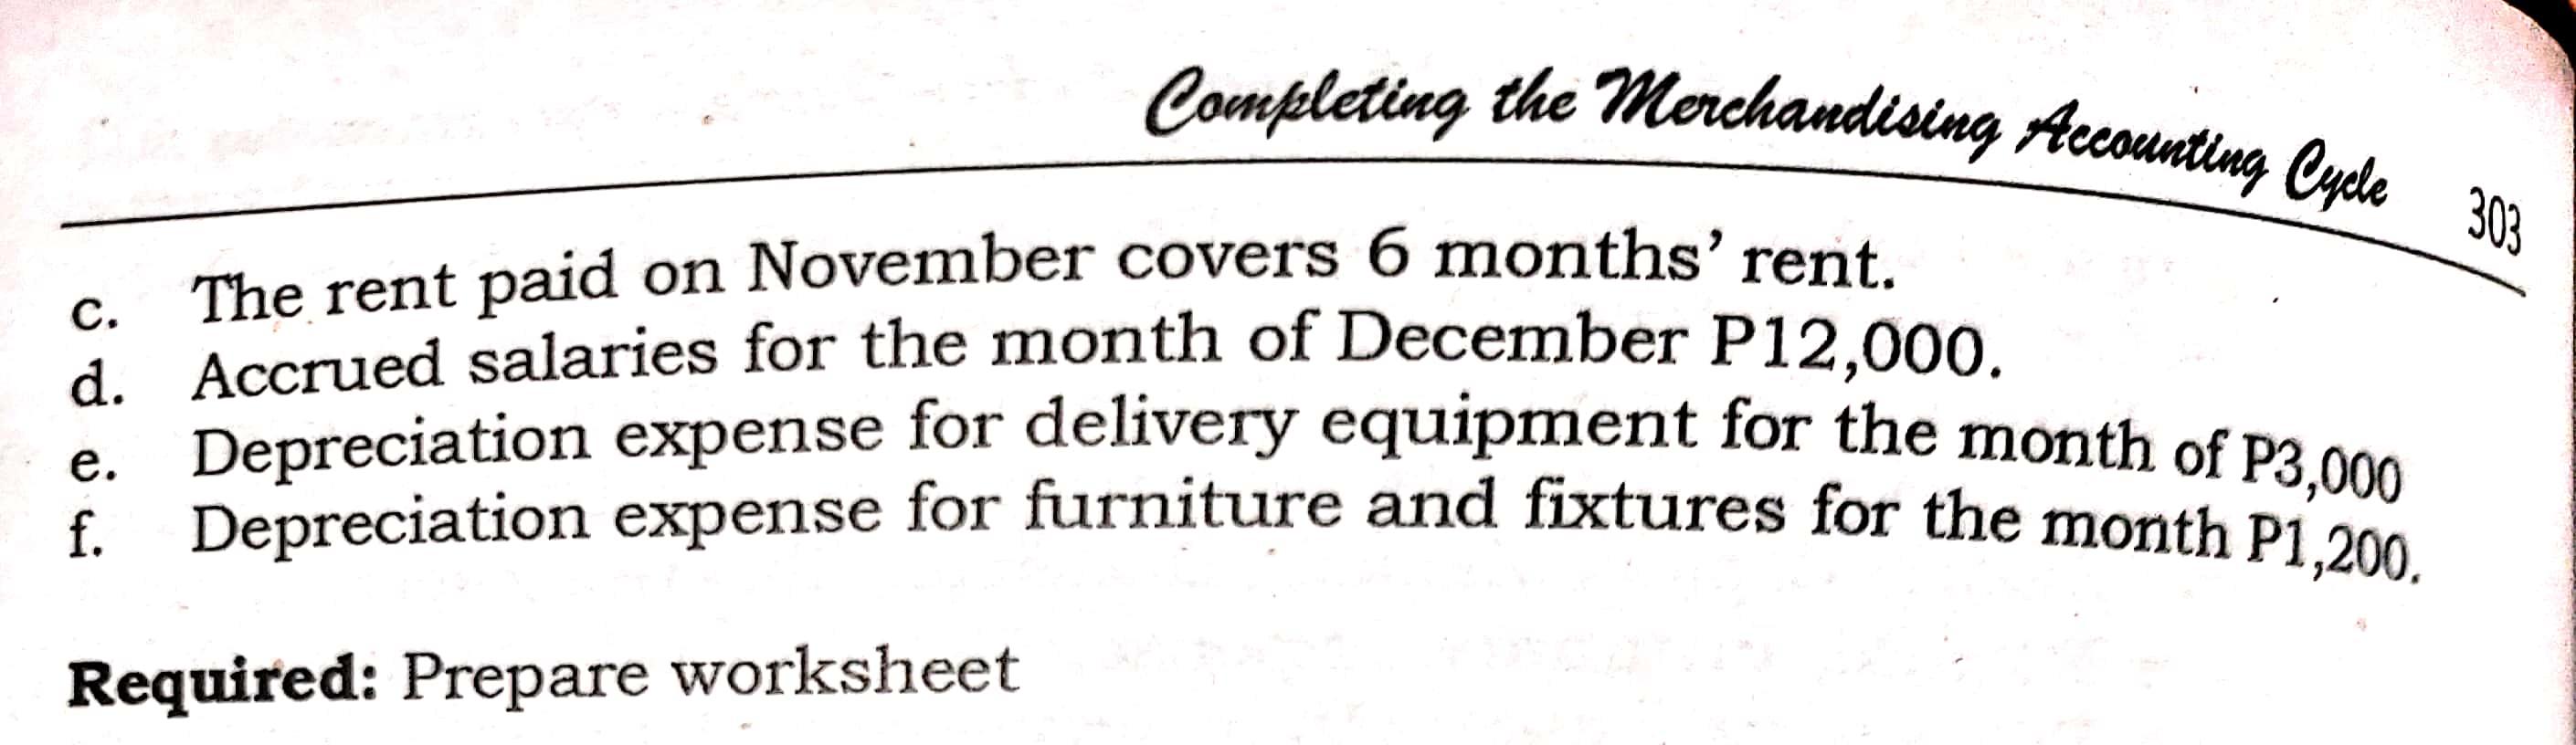 The rent paid on November covers 6 months' rent. d. Accrued salaries for the month of December P12,000. C.